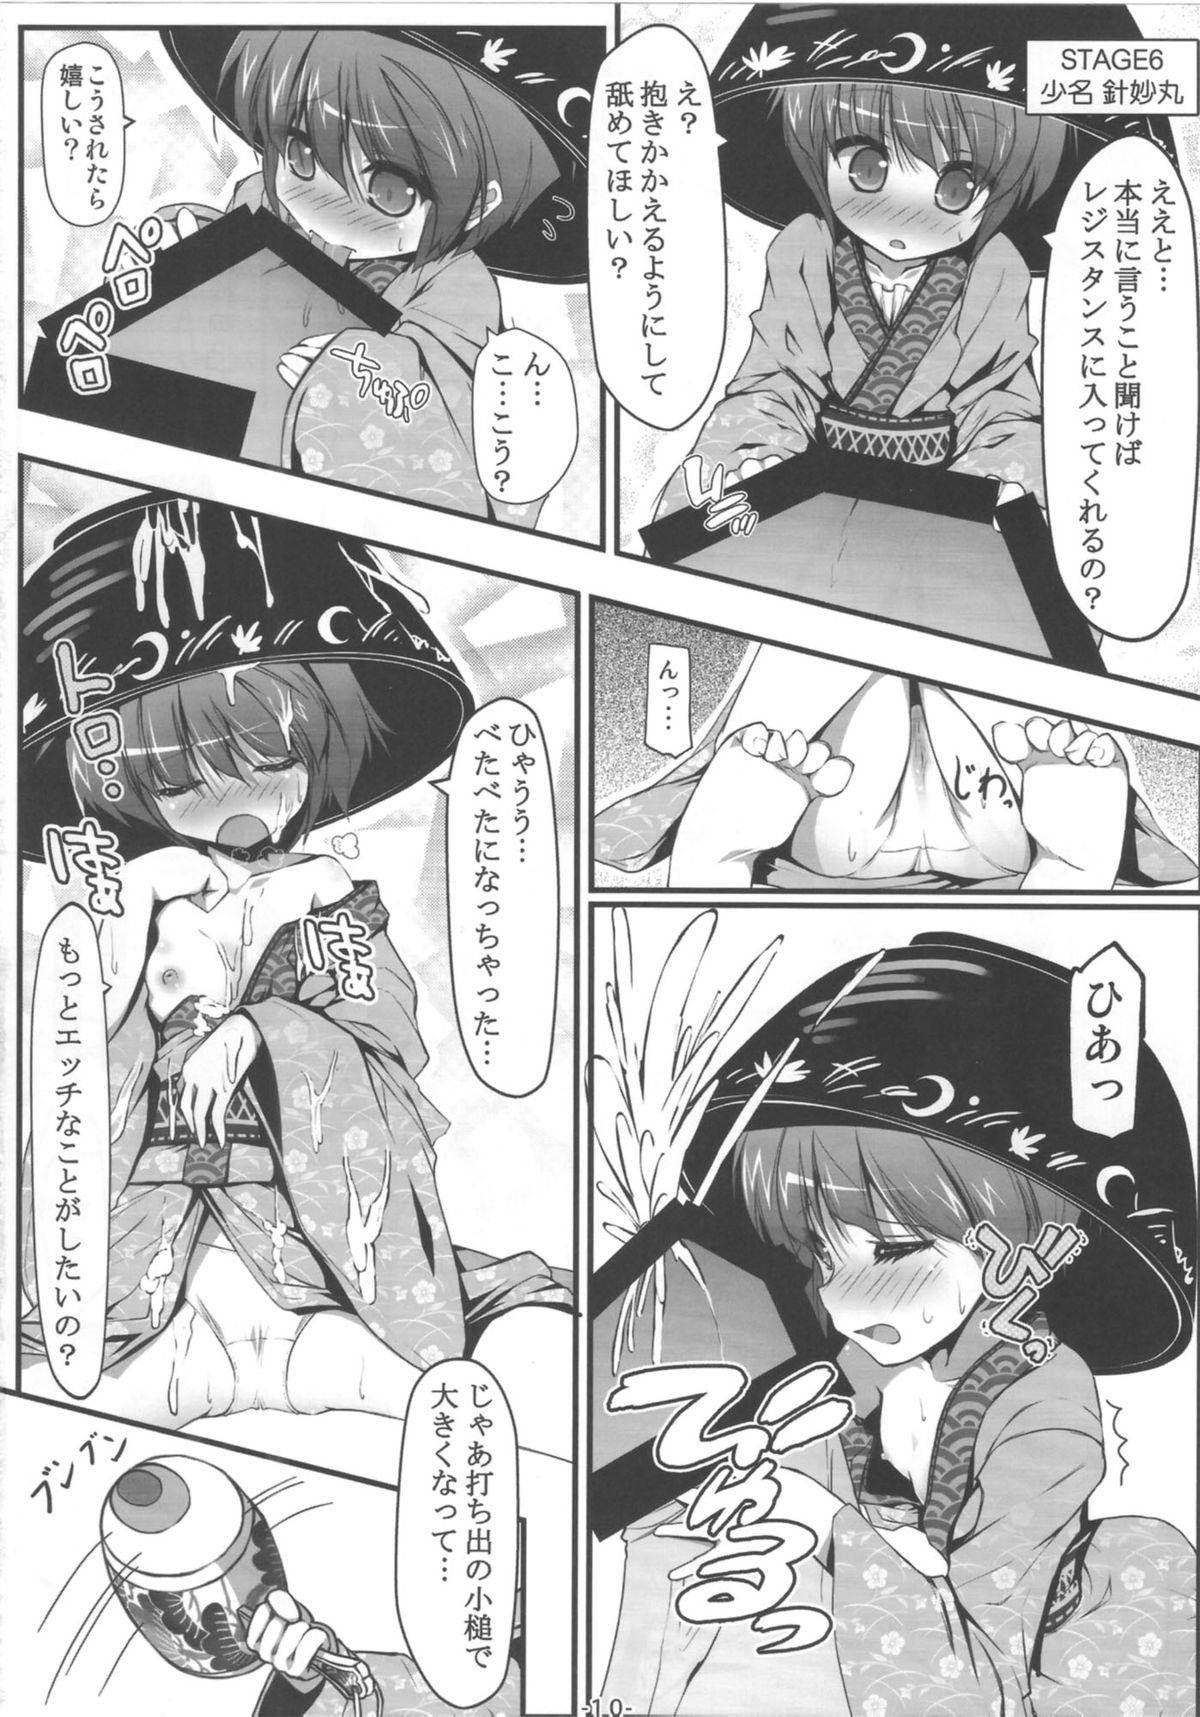 Gaystraight Ookikuna ~ Re!? - Touhou project Bush - Page 11